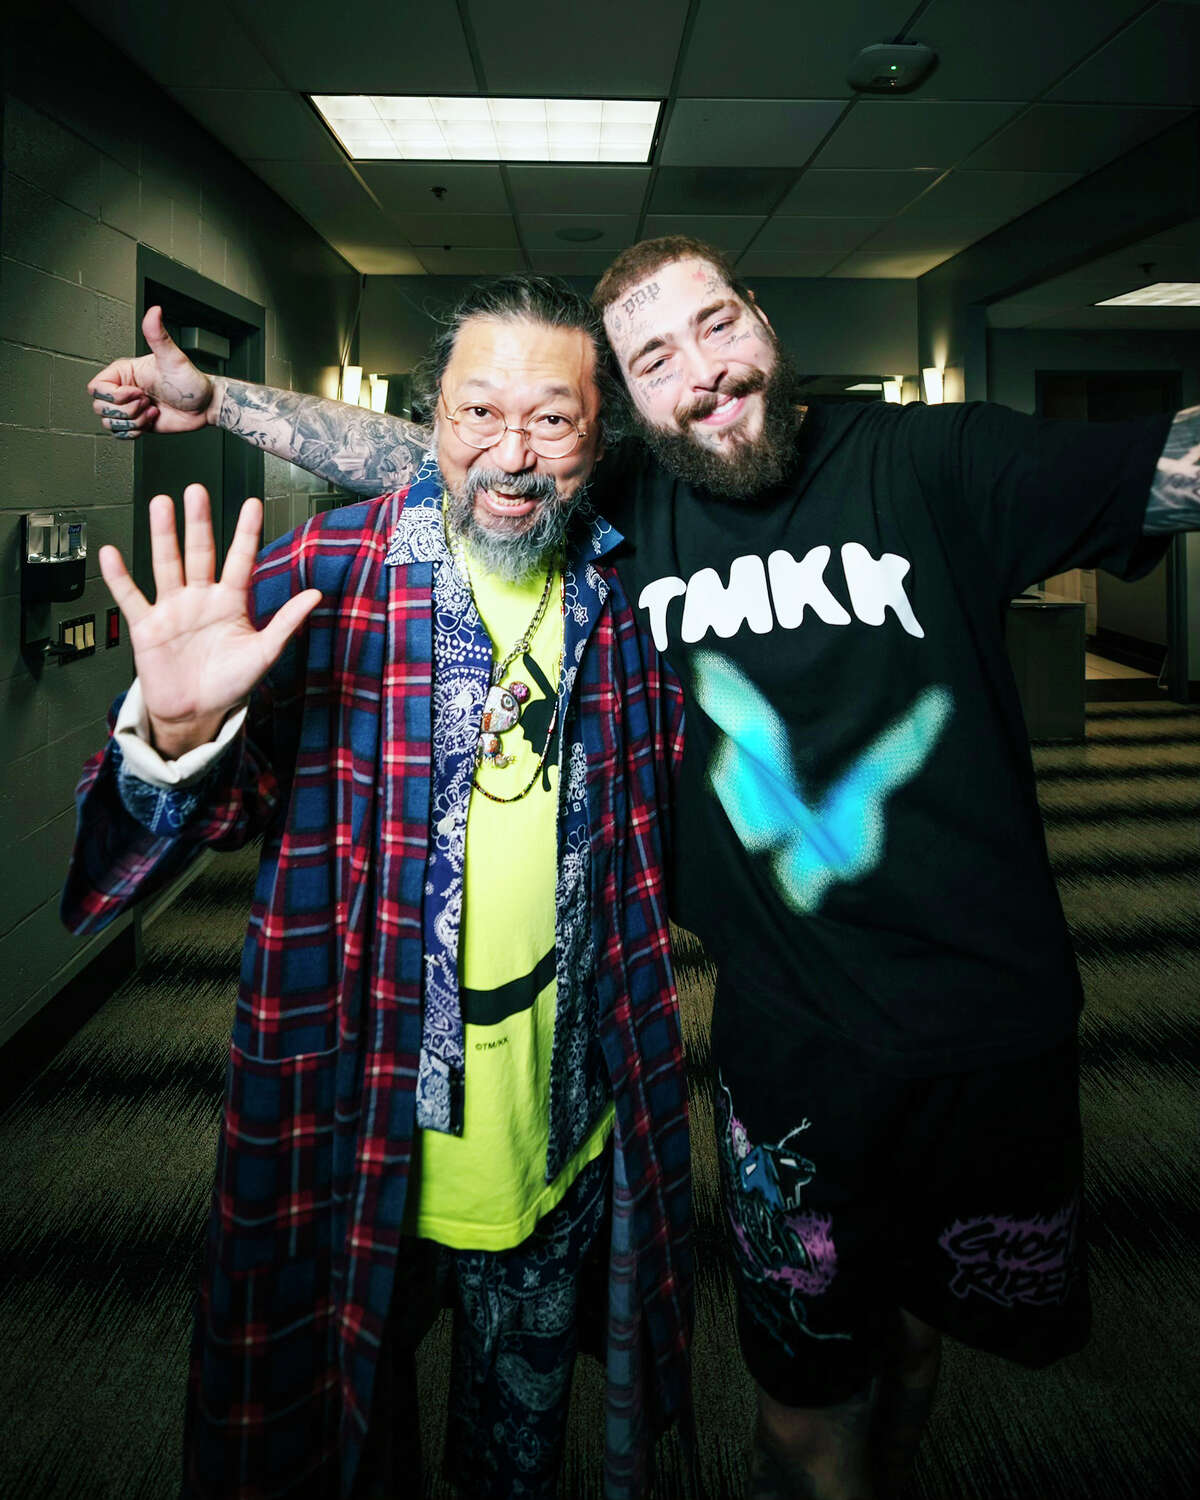 Japanese artist Takashi Murakami (left) and American rapper and singer Post Malone take a photo together Nov. 15 during Malone's concert at Crypto.com Arena in Los Angeles. Murakami created various artworks and products, featured in a pop-up store in Los Angeles, during Malone's tour for his latest album, "Twelve Carat Toothache."